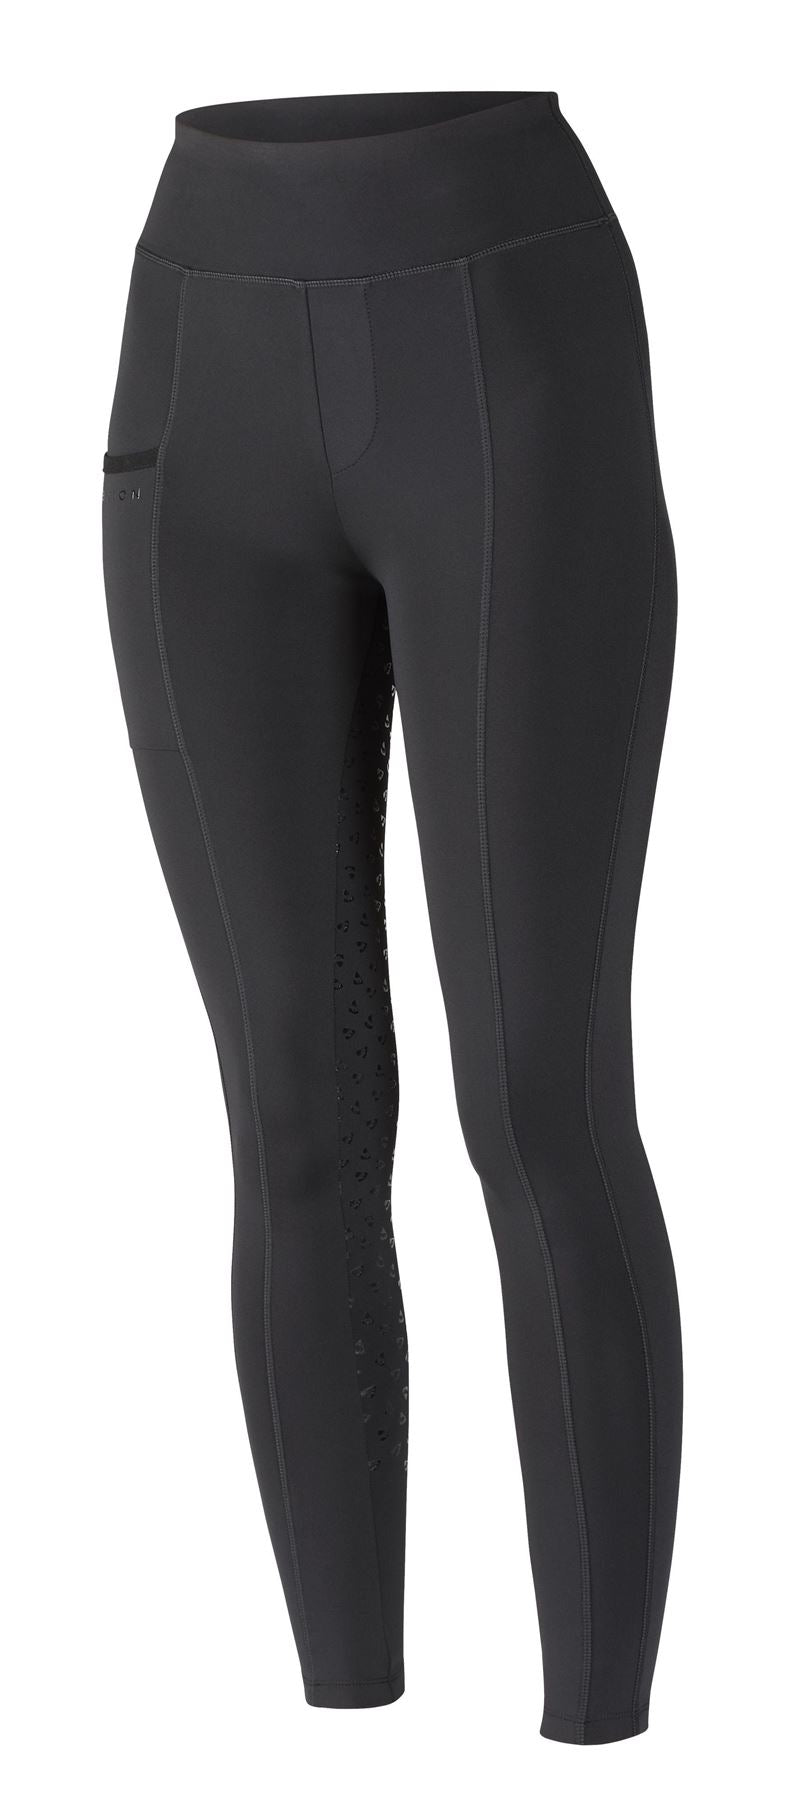 Shires Aubrion Hudson Riding Tights - Just Horse Riders